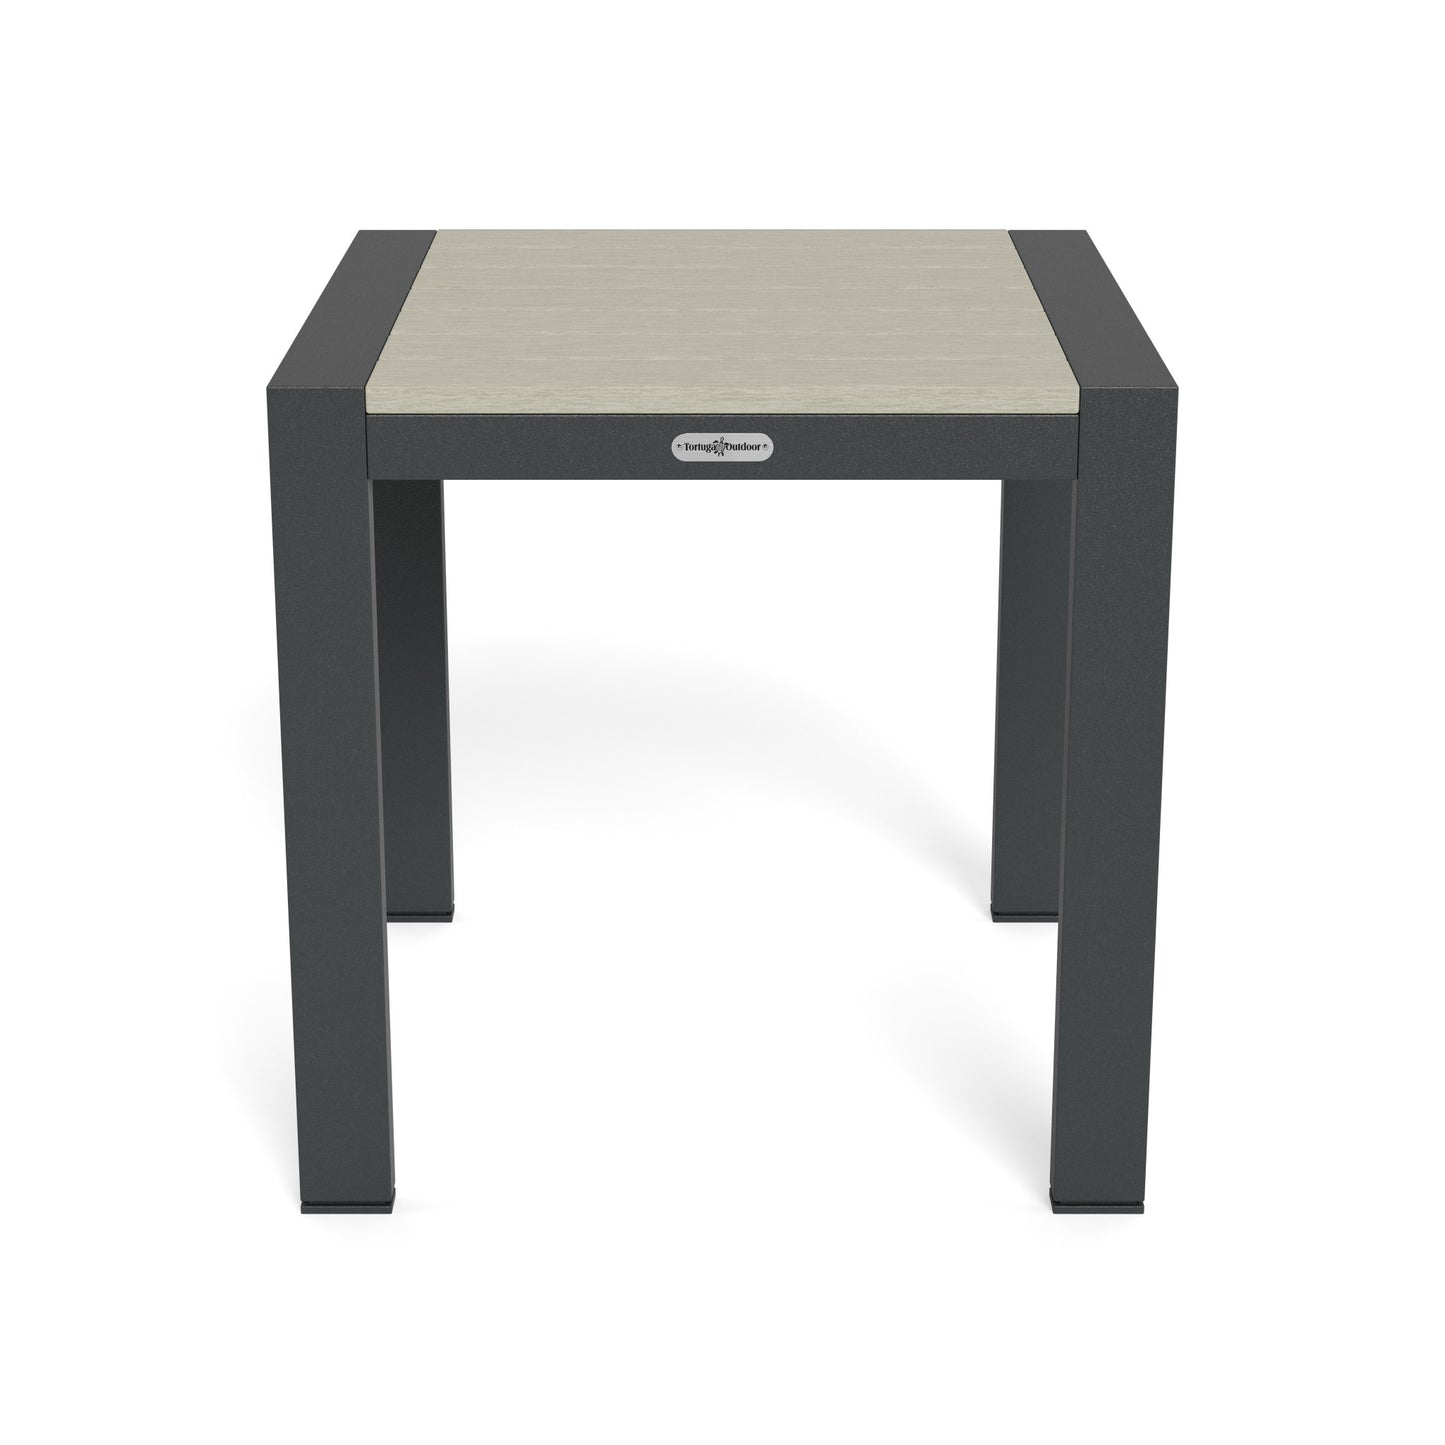 Lakeview, 3-Pc Seat Set, Chair/Chair/side table - Grey/Grey